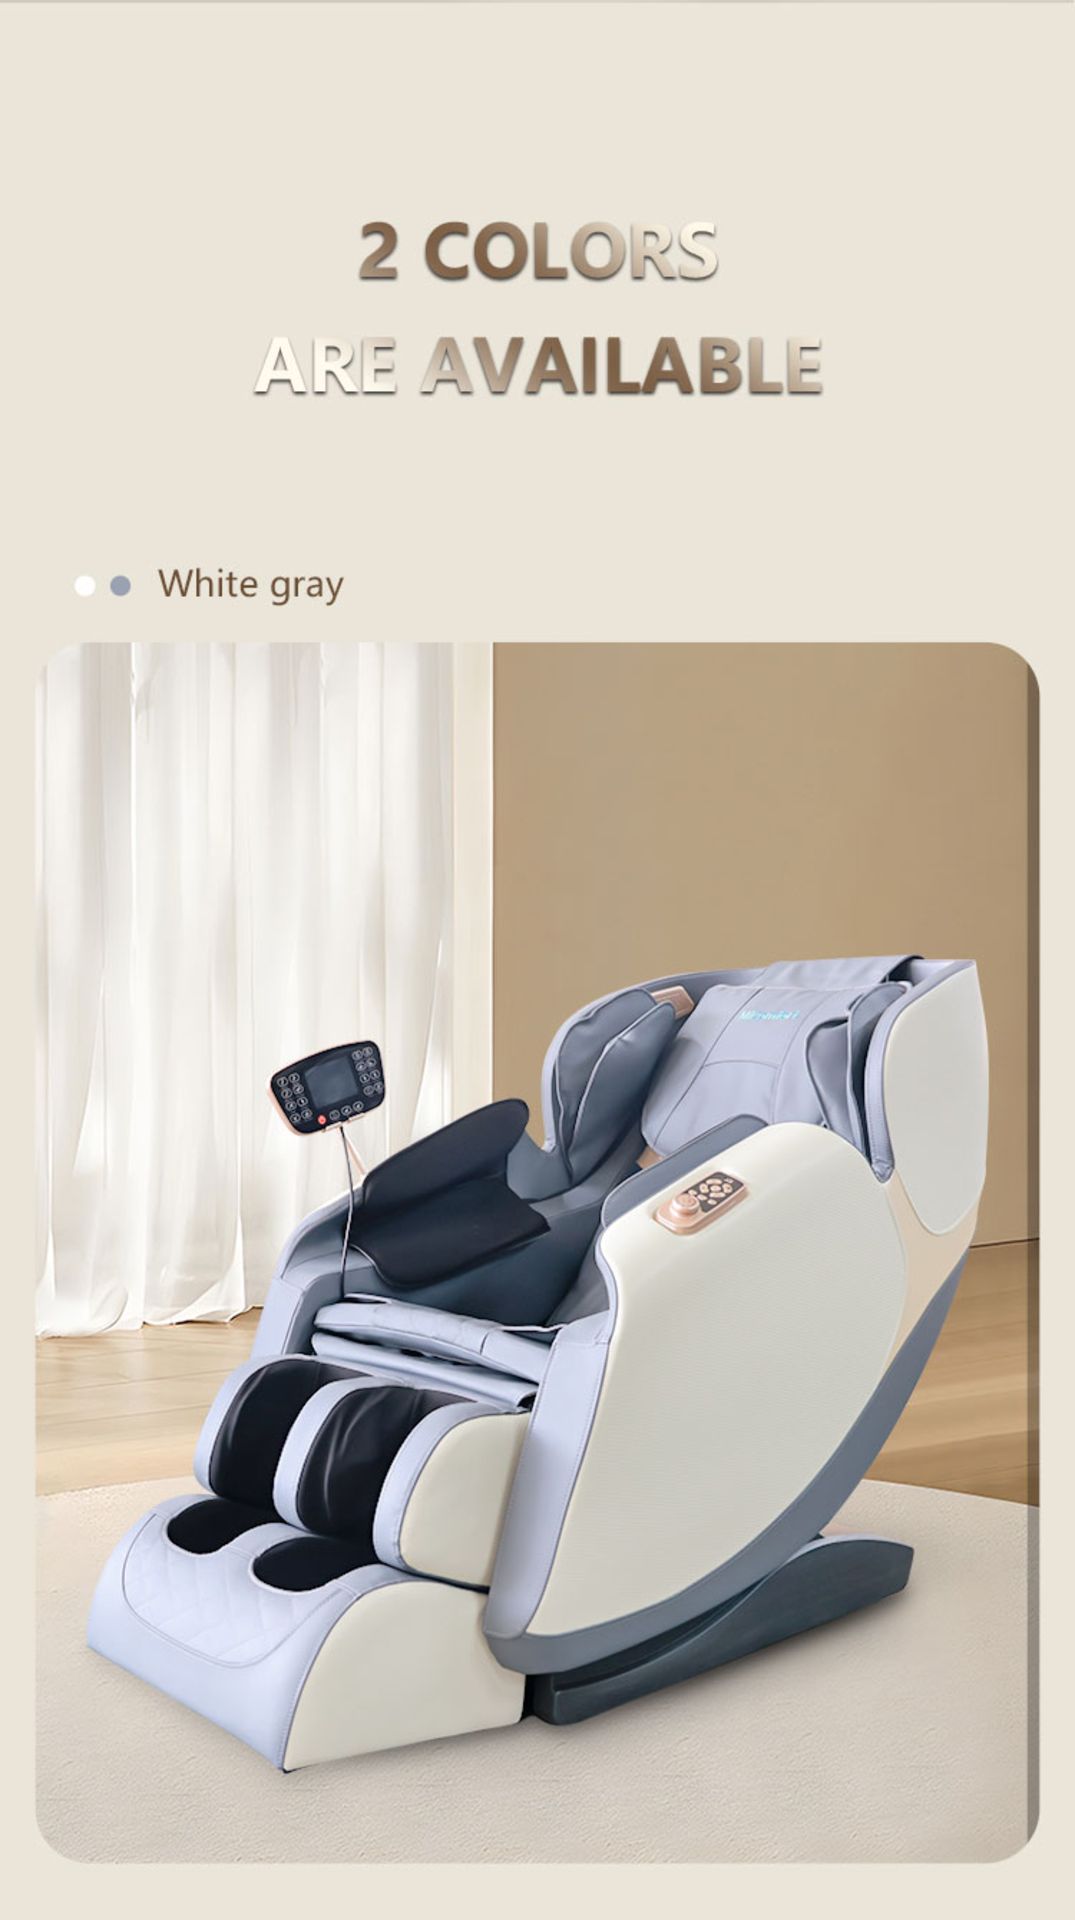 Brand New BOX Orchid White/Grey MiComfort Full Body Massage Chair RRP £2199 AS SEEN ON TV! *NO VAT* - Image 2 of 10